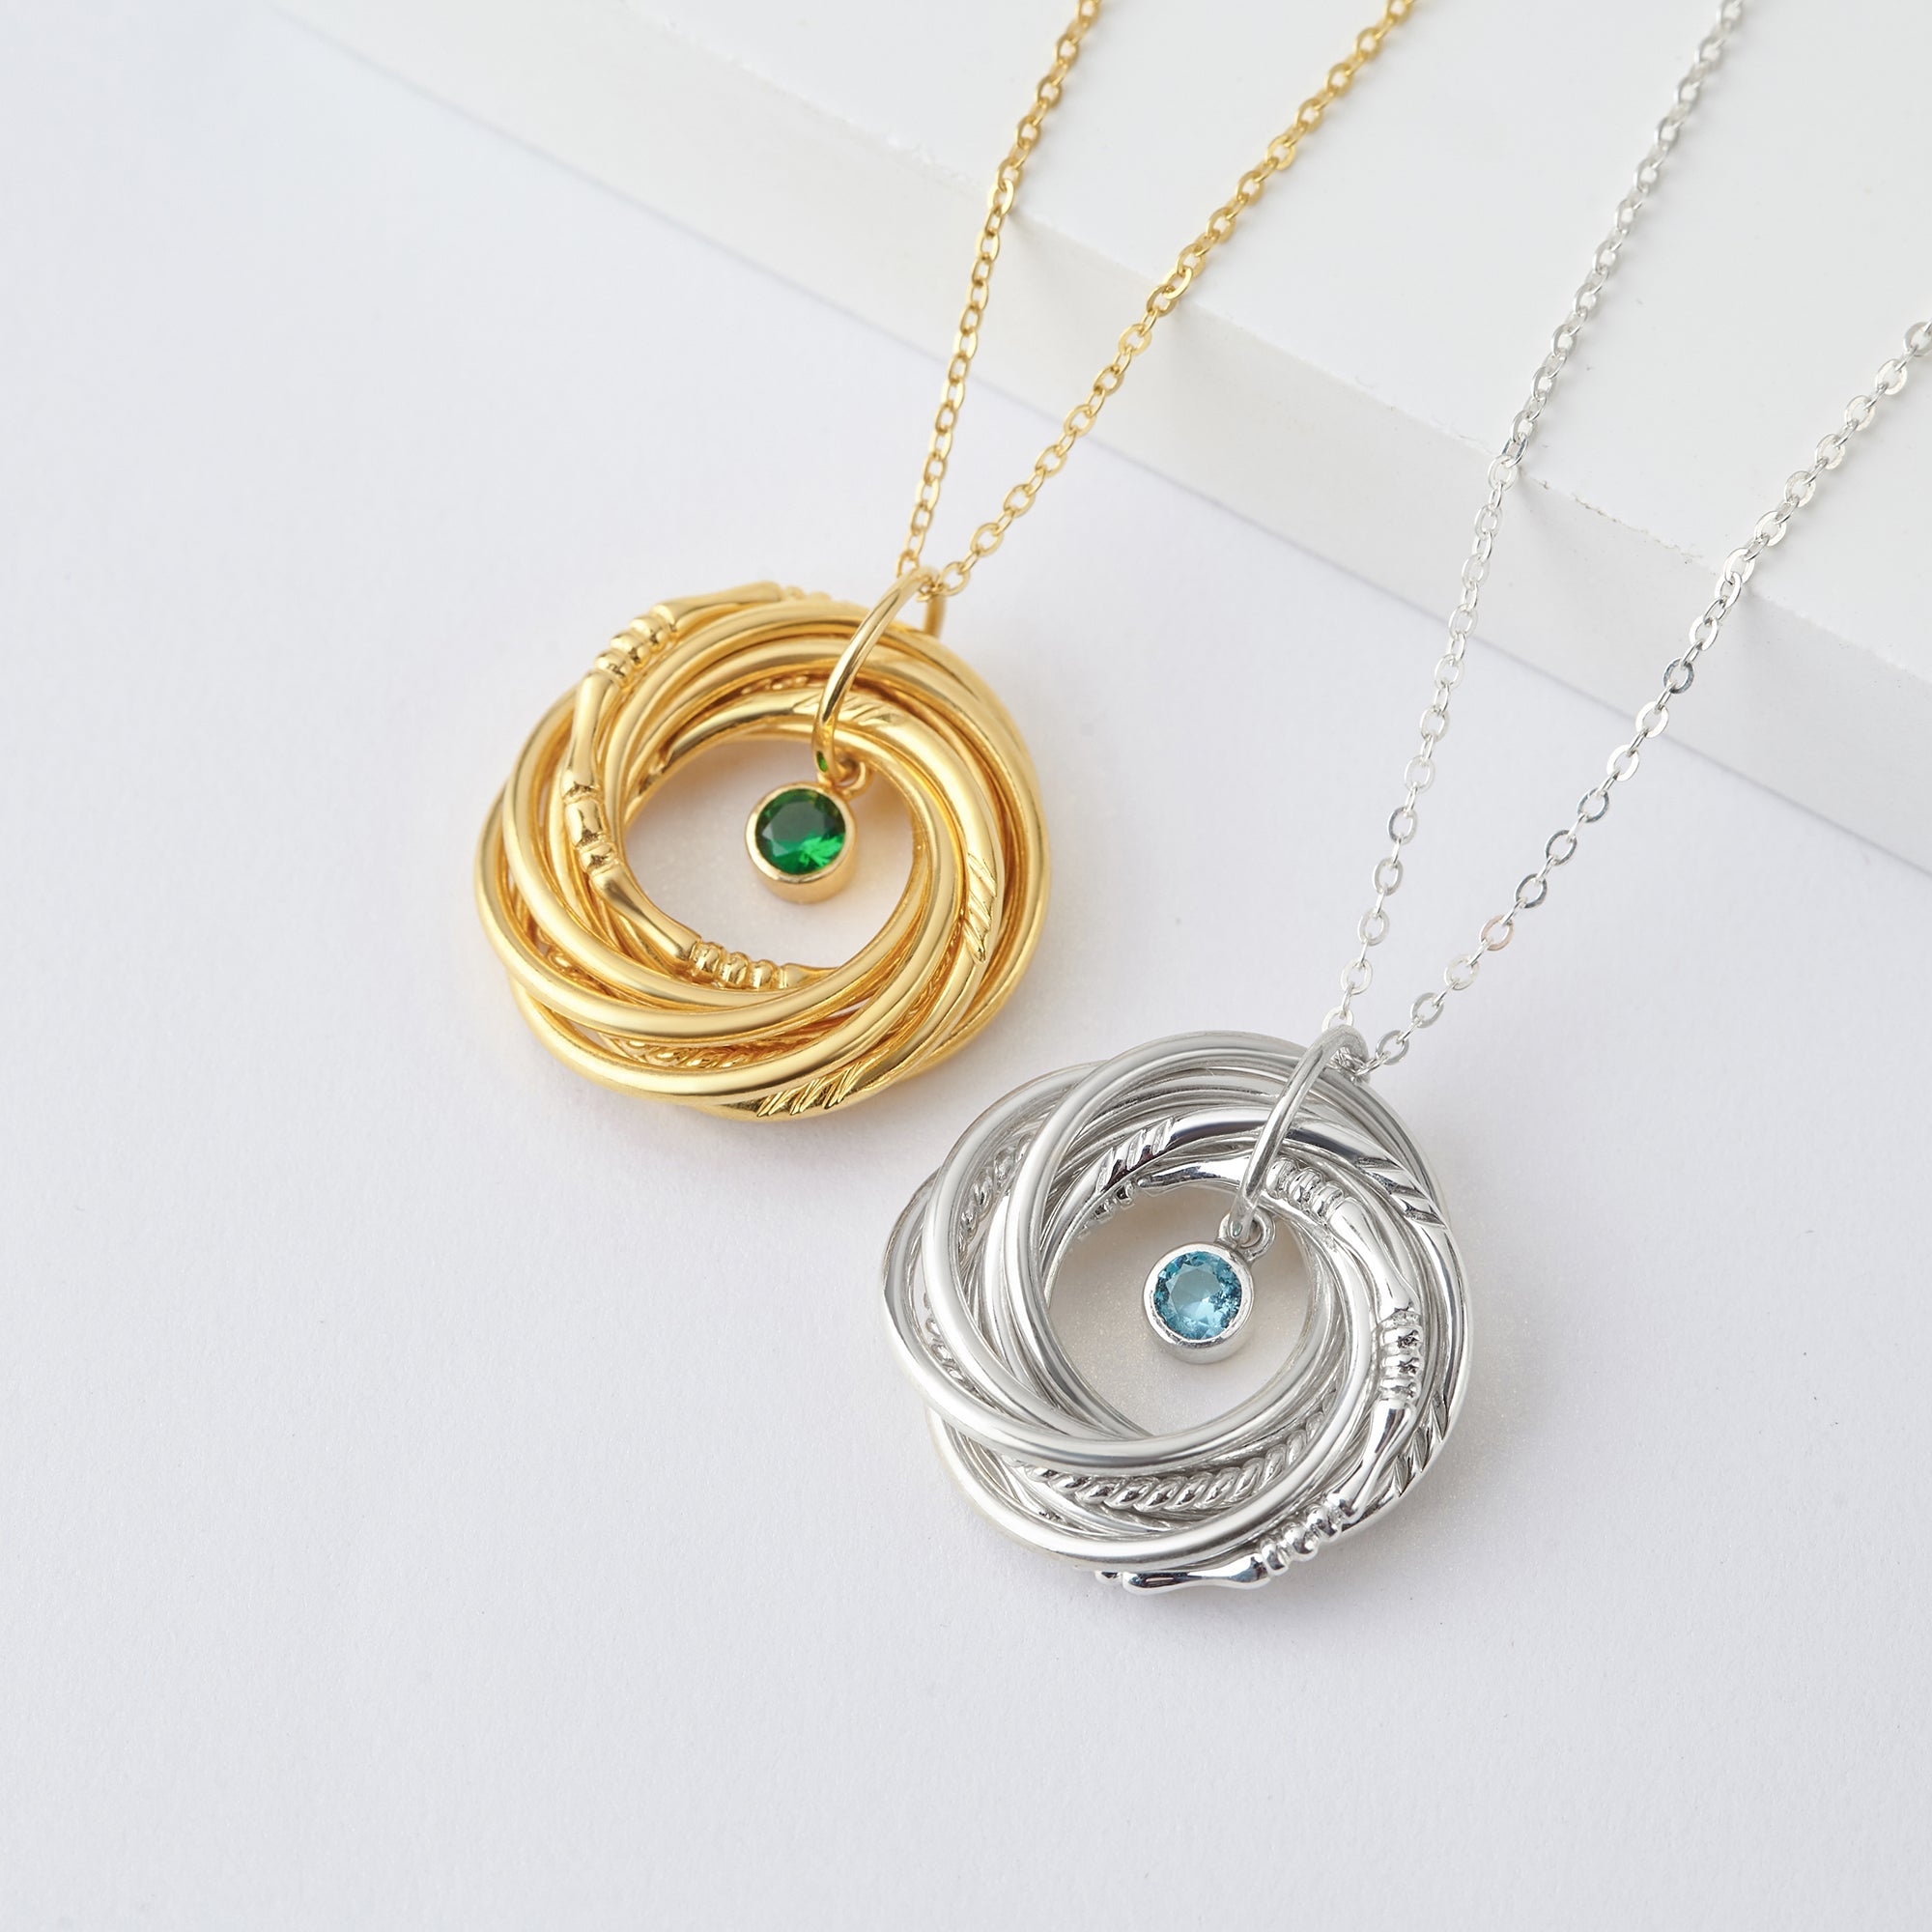 9 Ring Necklace for 90th Birthday with Birthstones, Sterling Silver and 18K Gold Plated Jewelry Gift for Mom or Grandma Bijou Her